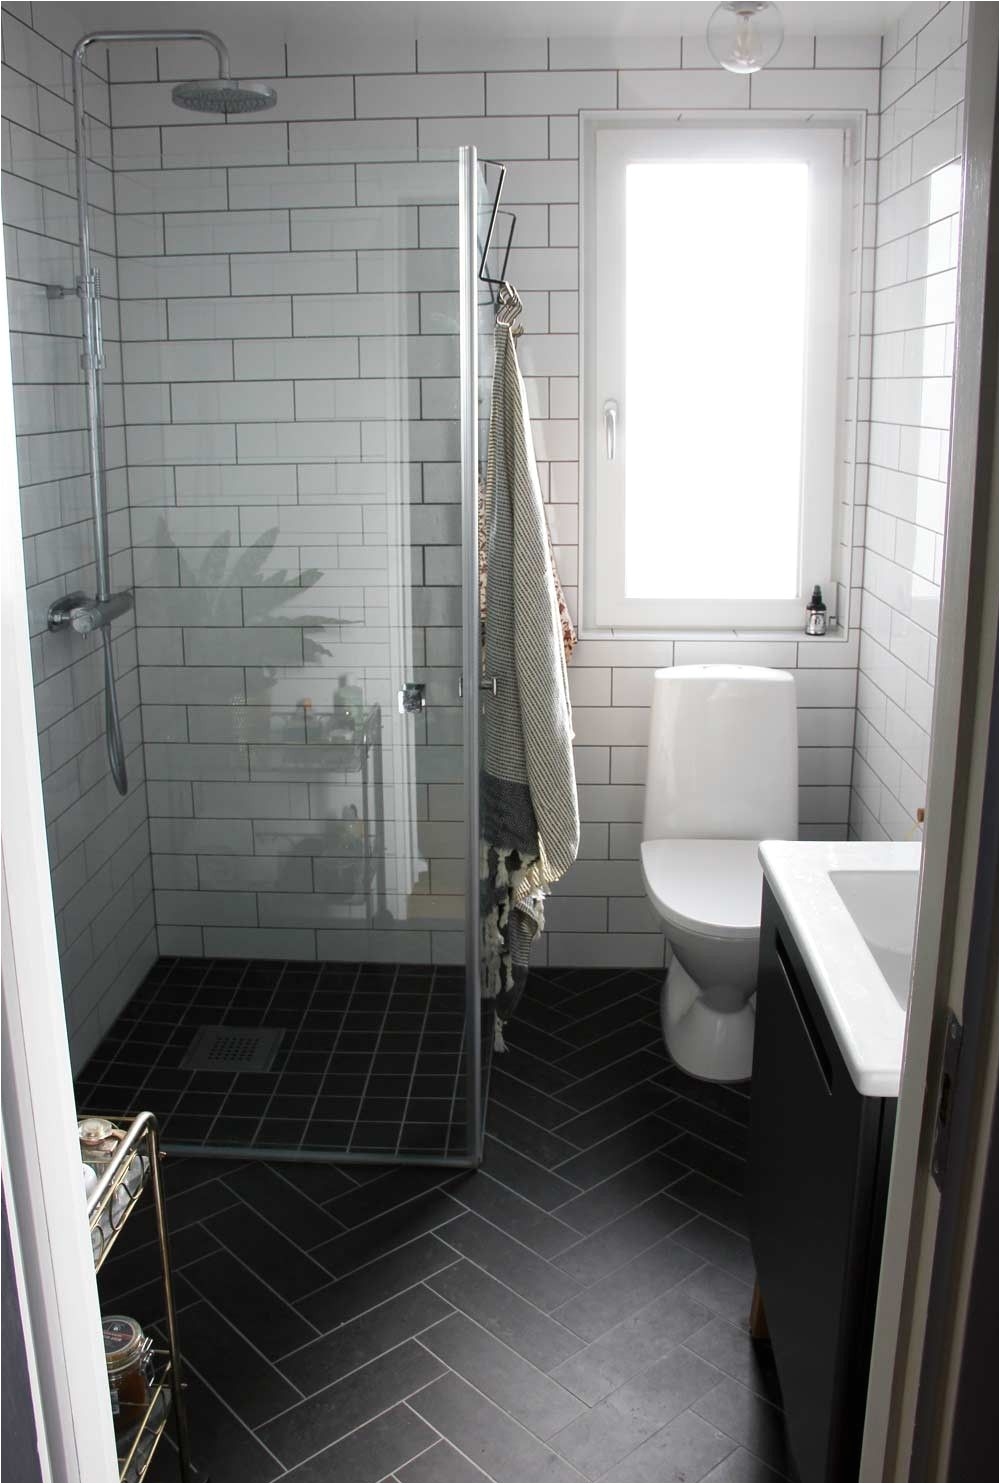 Best Grout for Shower Walls and Floors A Kurbits Villa Filled with Swedish Folk Art Bathrooms